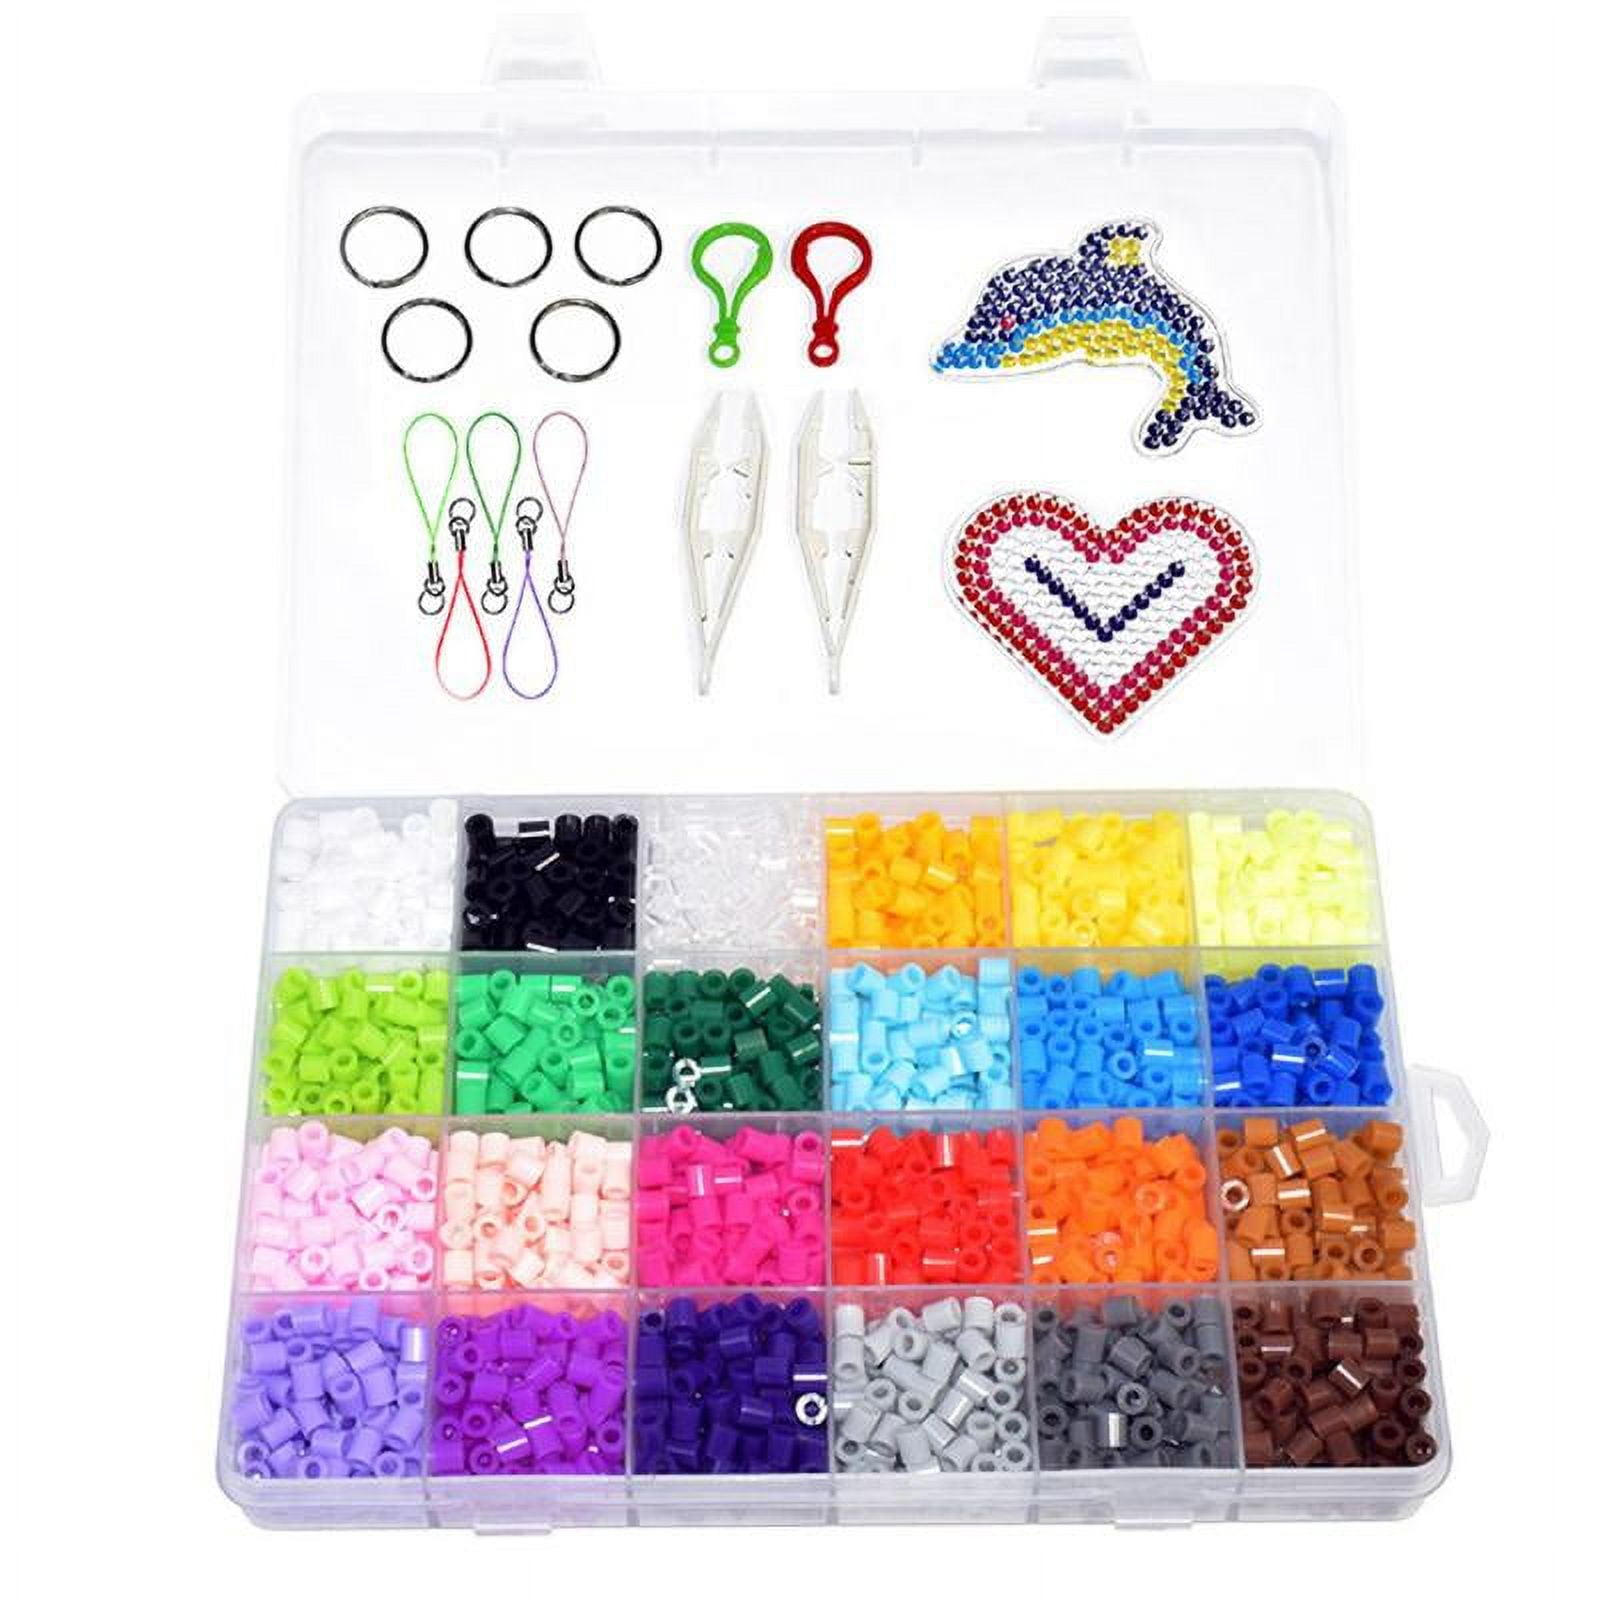 MageCrux Fashion 4pcs/lot Square Round Star Heart Perler Hama Beads Peg  Board Pegboard for 2.6mm 